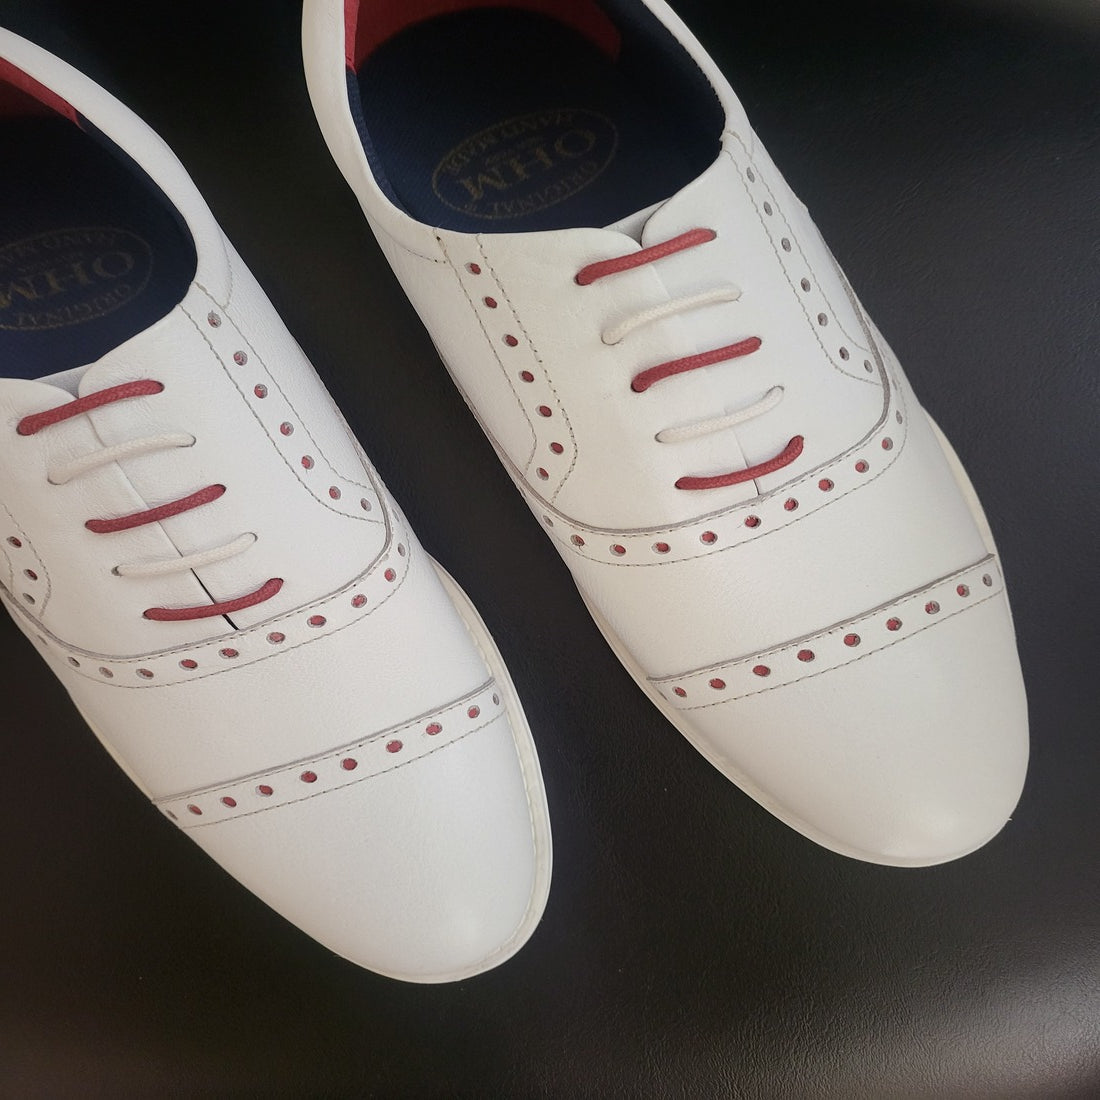 OHM New York Cap Toe Oxford Sporty Designer Leather Shoes White Color